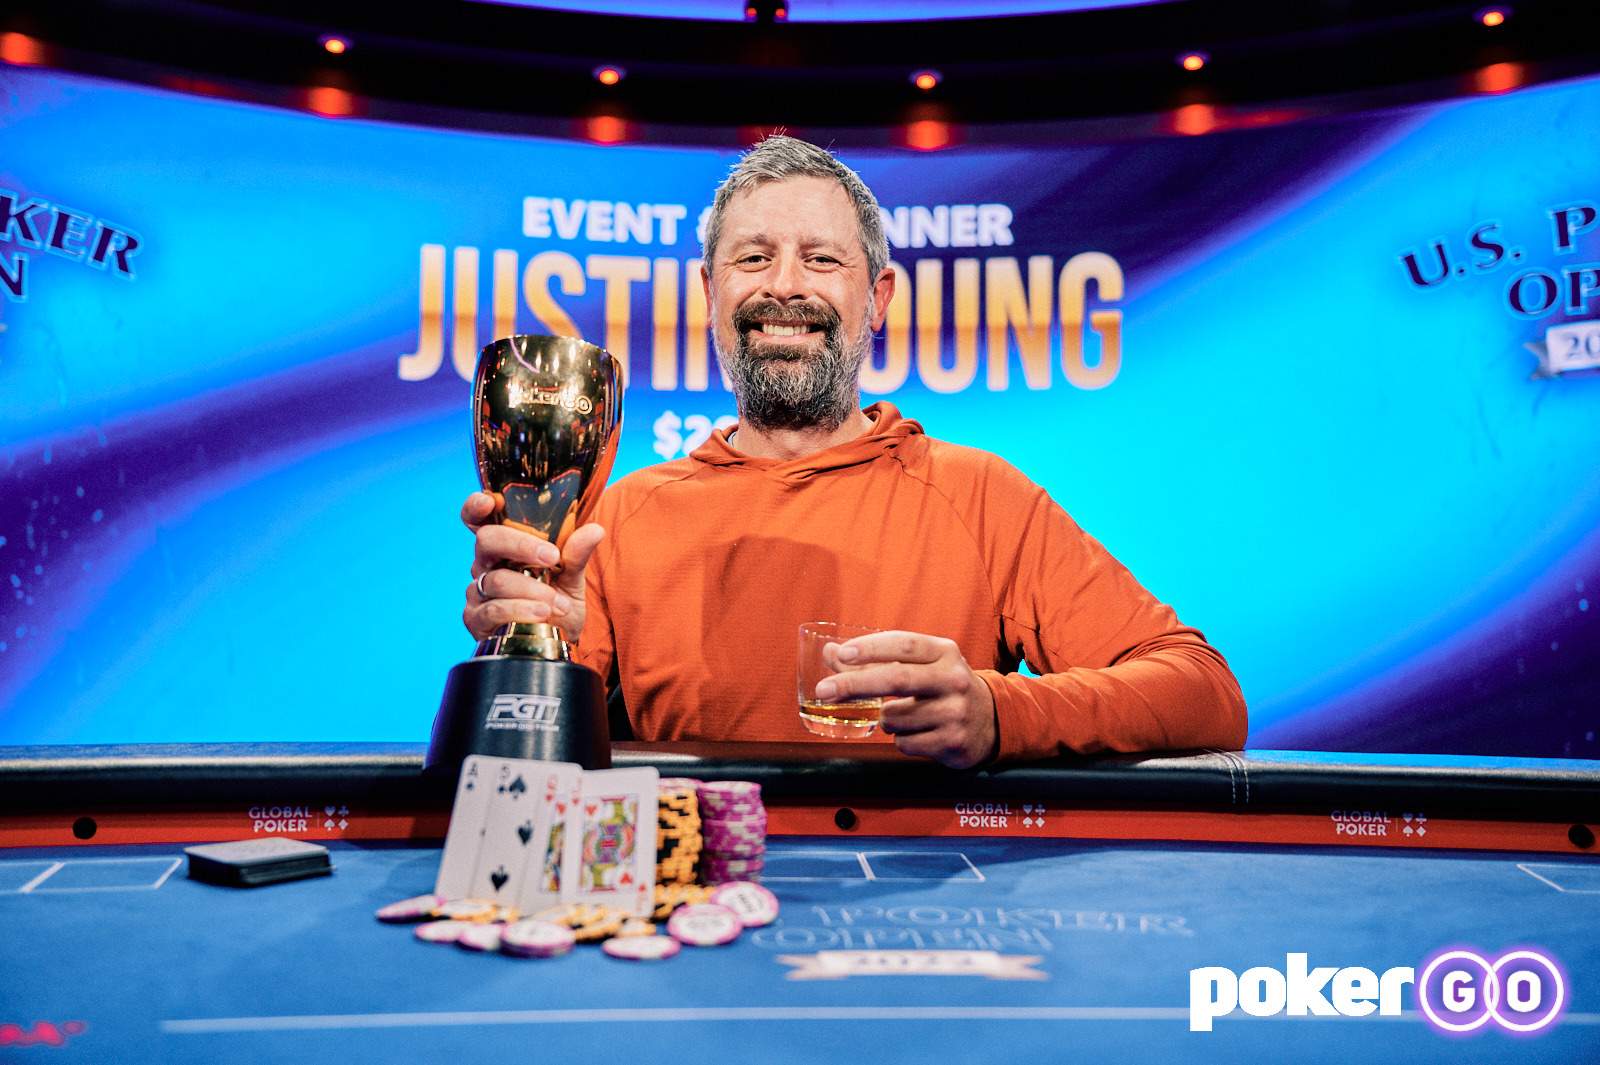 Justin Young Wins U.S. Poker Open Event #2 for $200,200